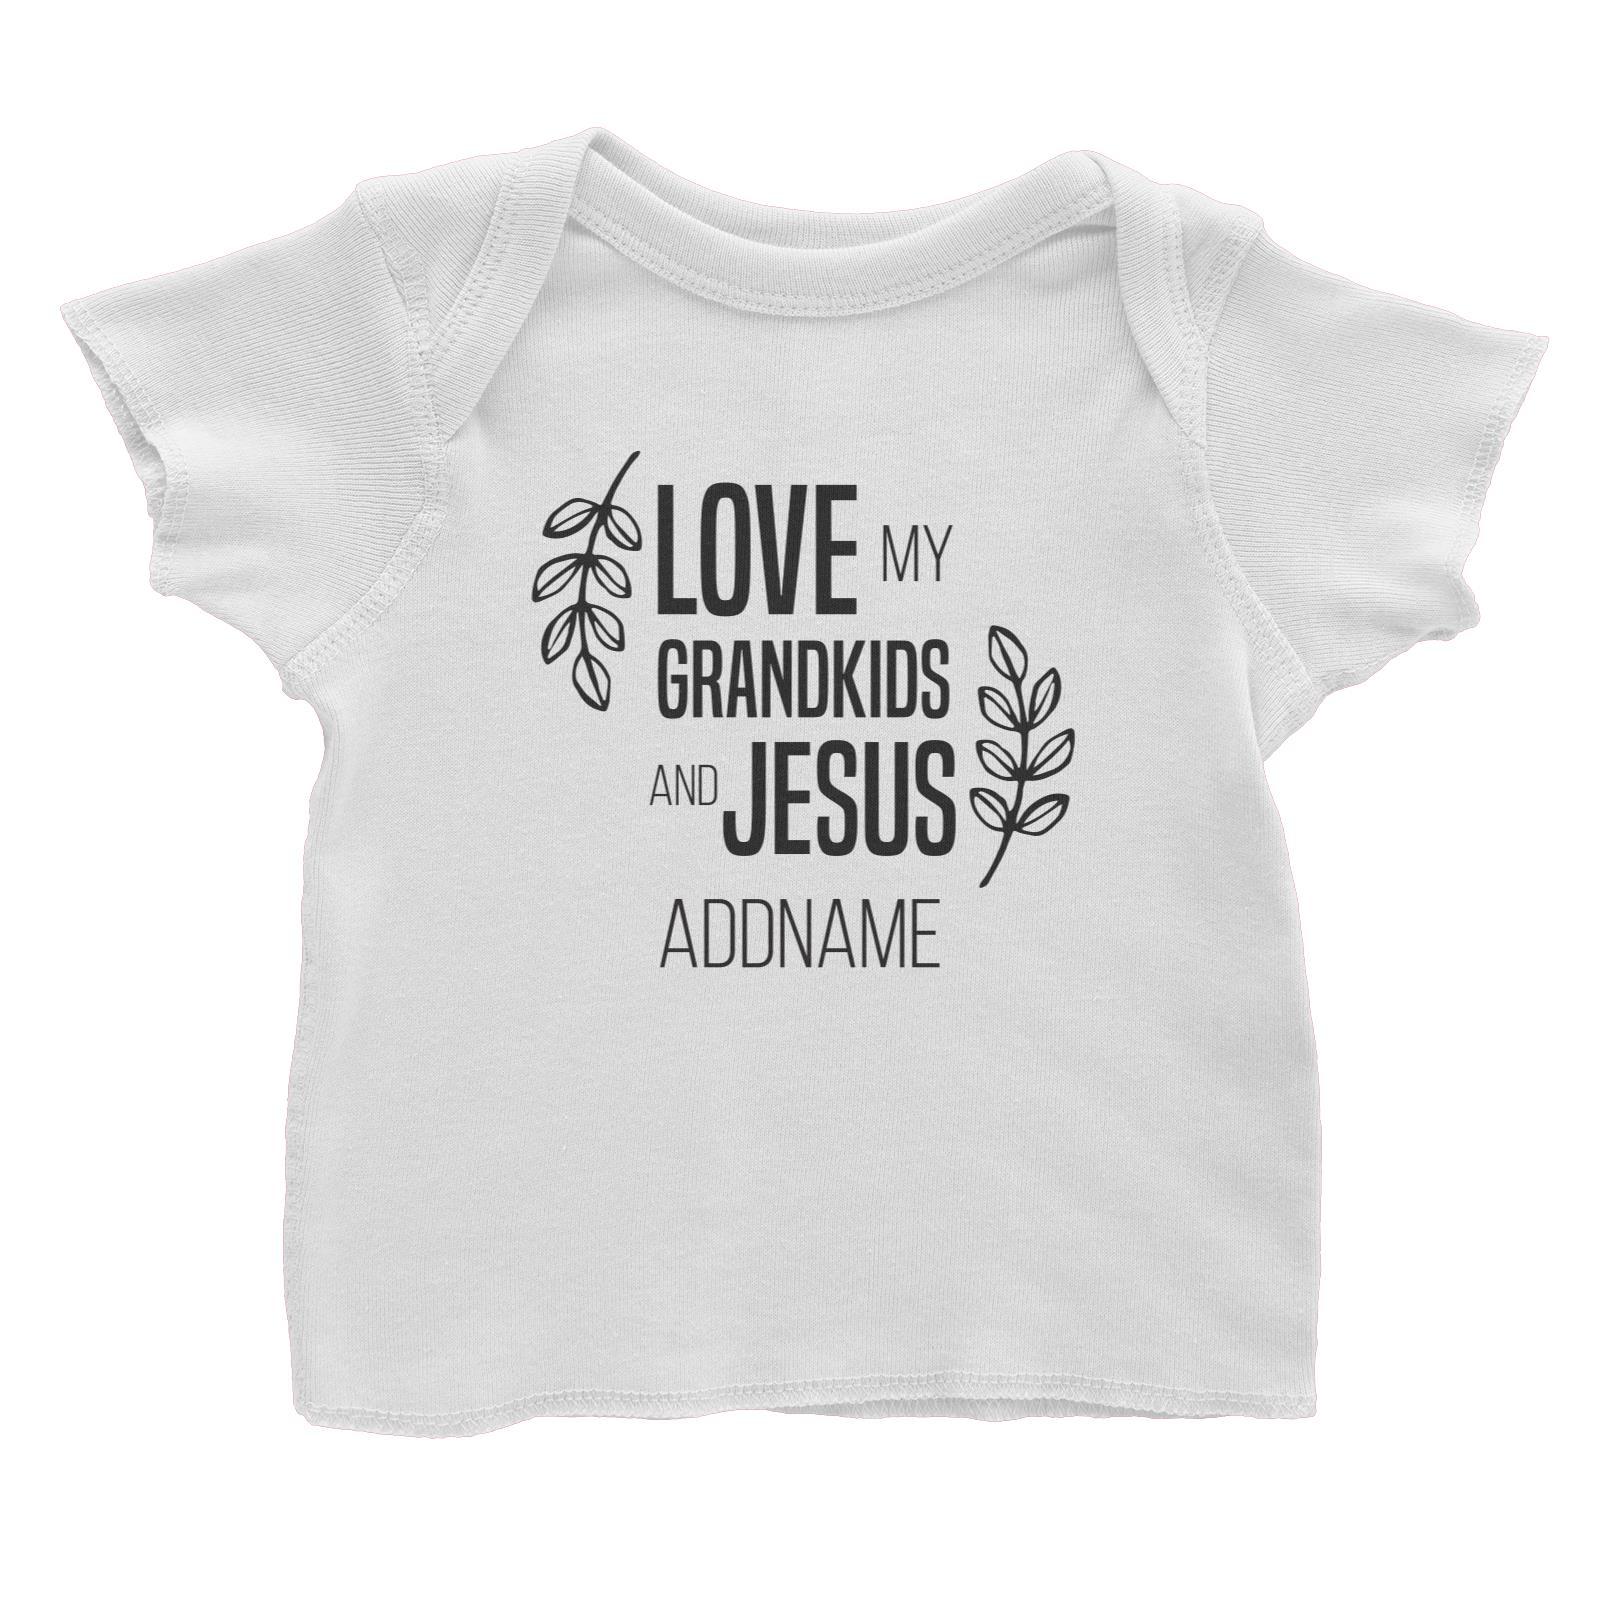 Christian Series Love My Grandkids And Jesus Addname Baby T-Shirt